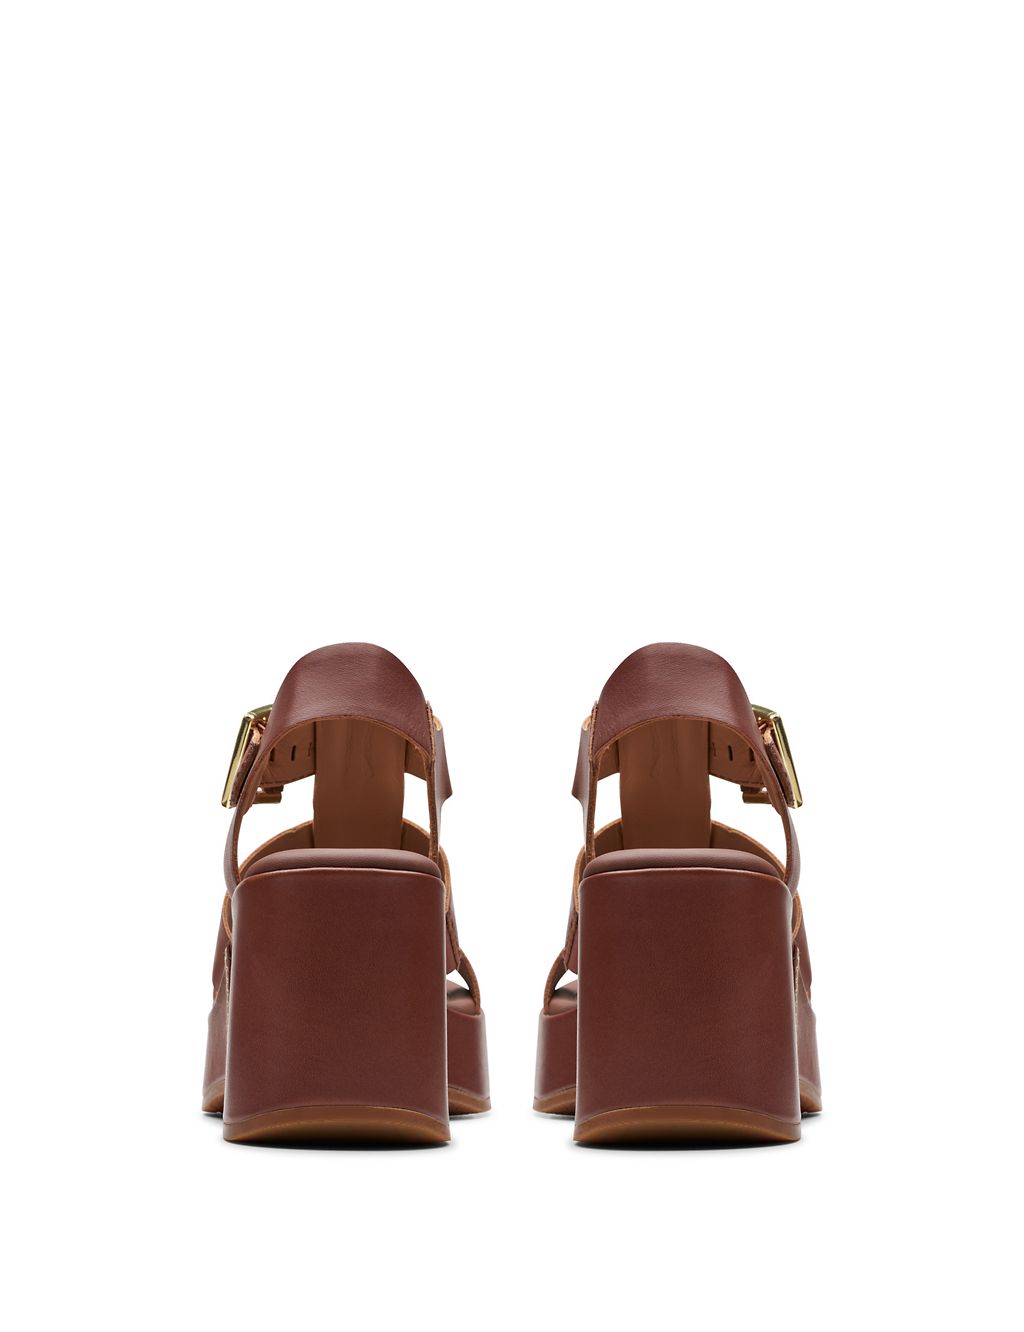 Leather Wedge Sandals 5 of 6